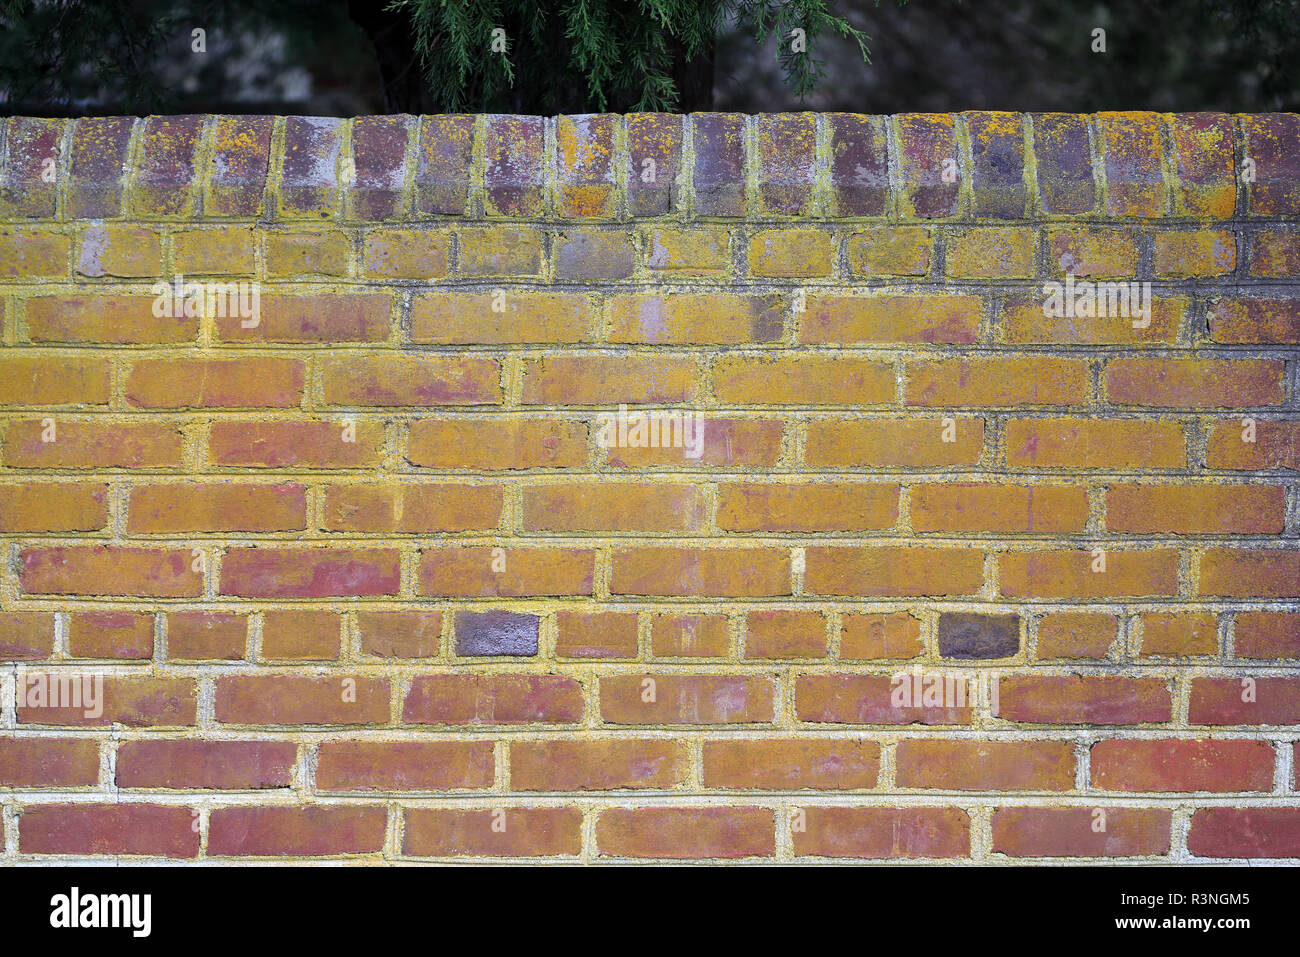 historic red brick wall with yellow lichen Stock Photo